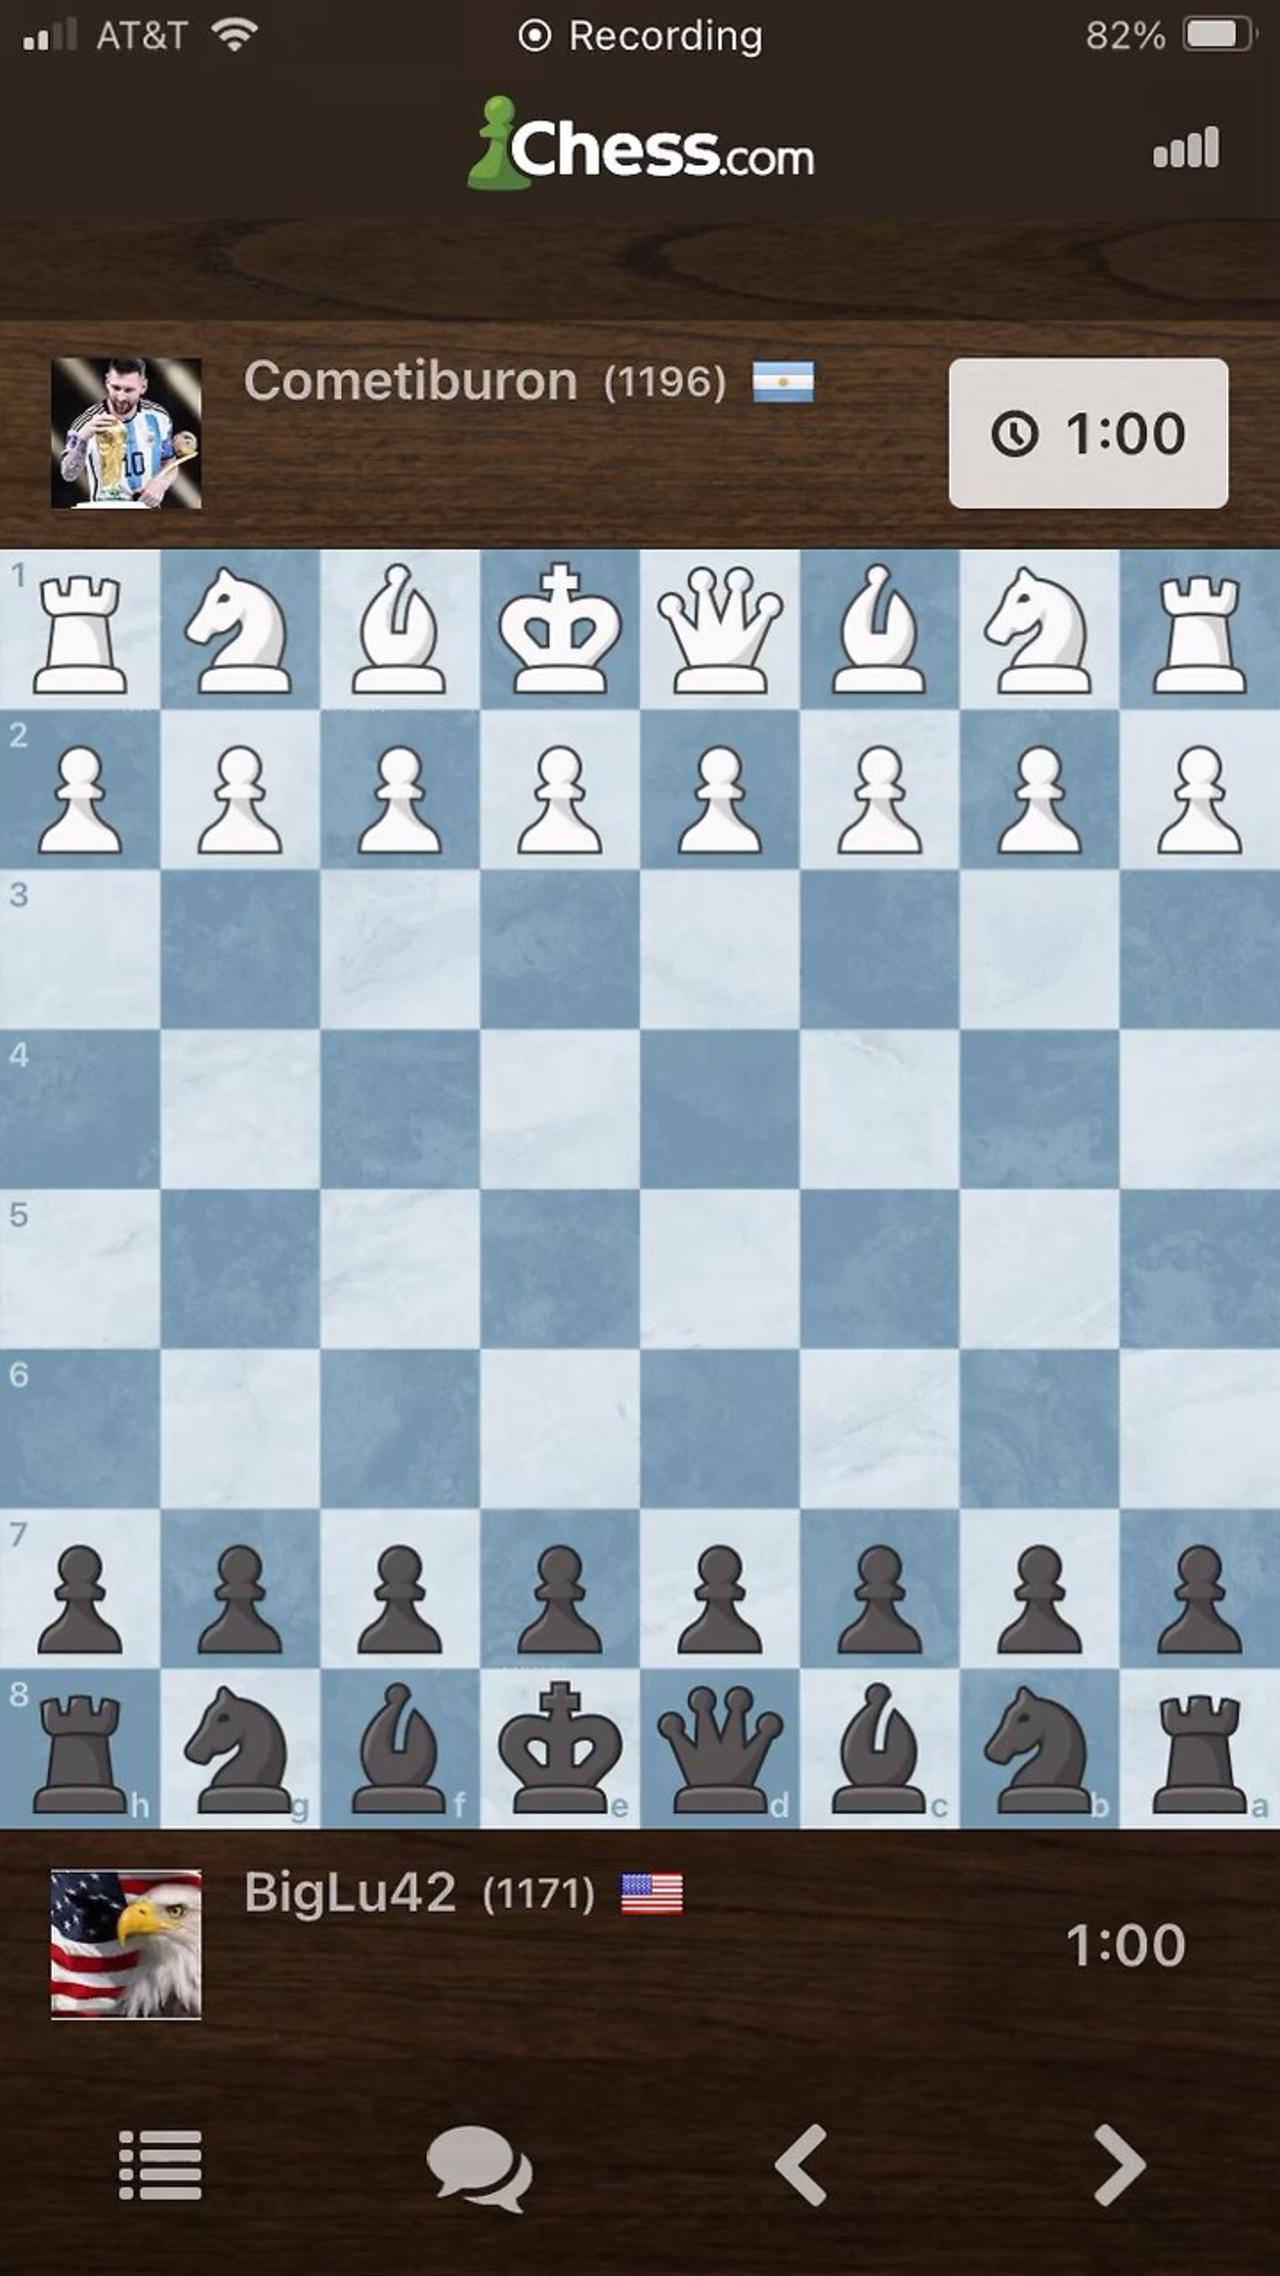 INTERMEDIATE BULLET CHESS GAMEPLAY - opening advantages can ultimately lead to a large loss of time